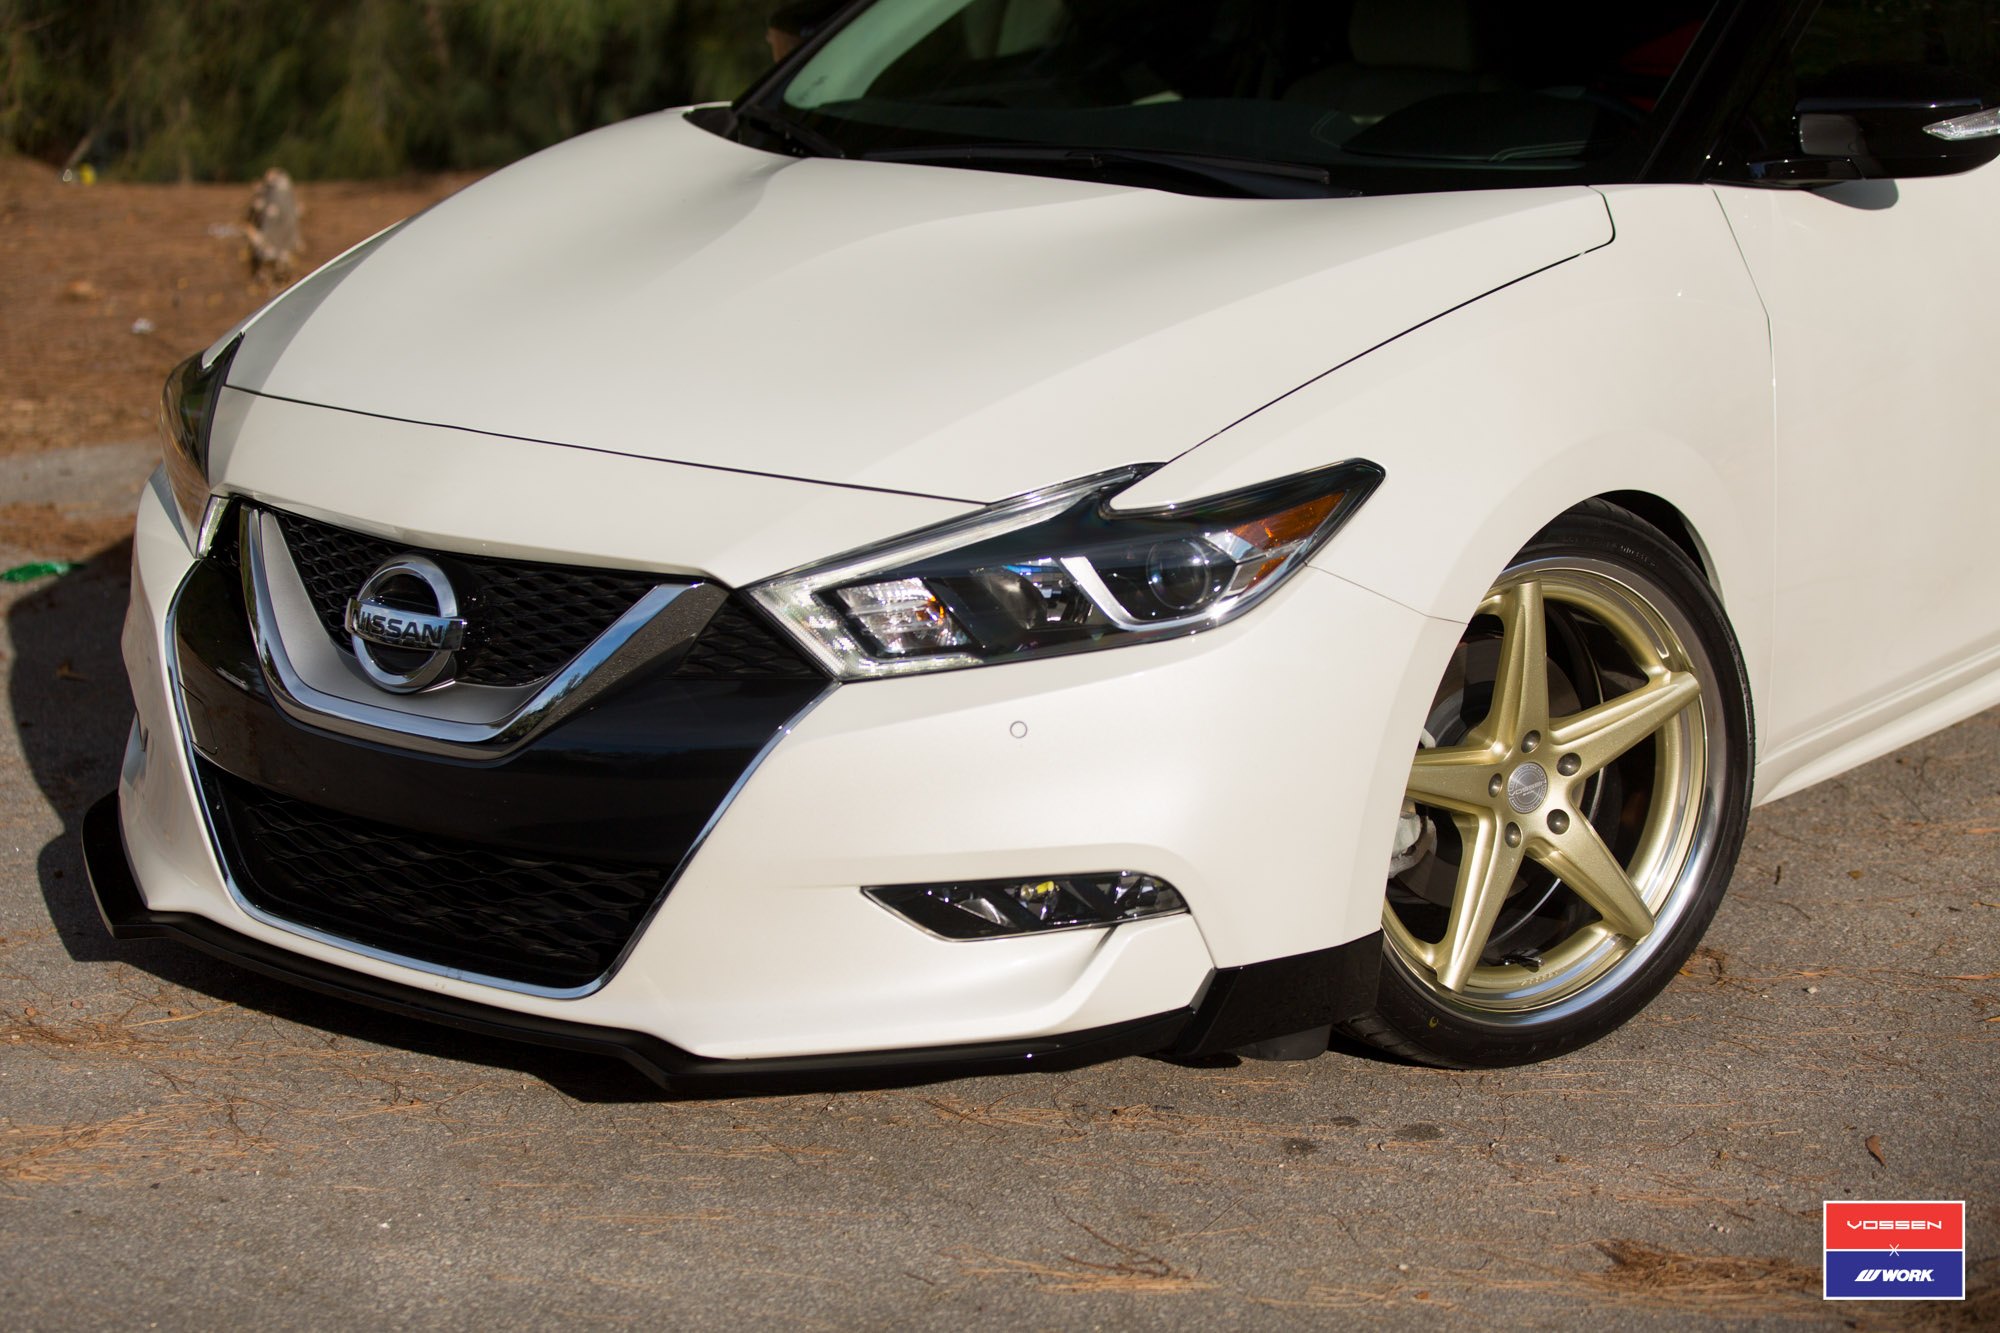 Gold Vossen Rims With Work Polished Lips - Photo by Vossen